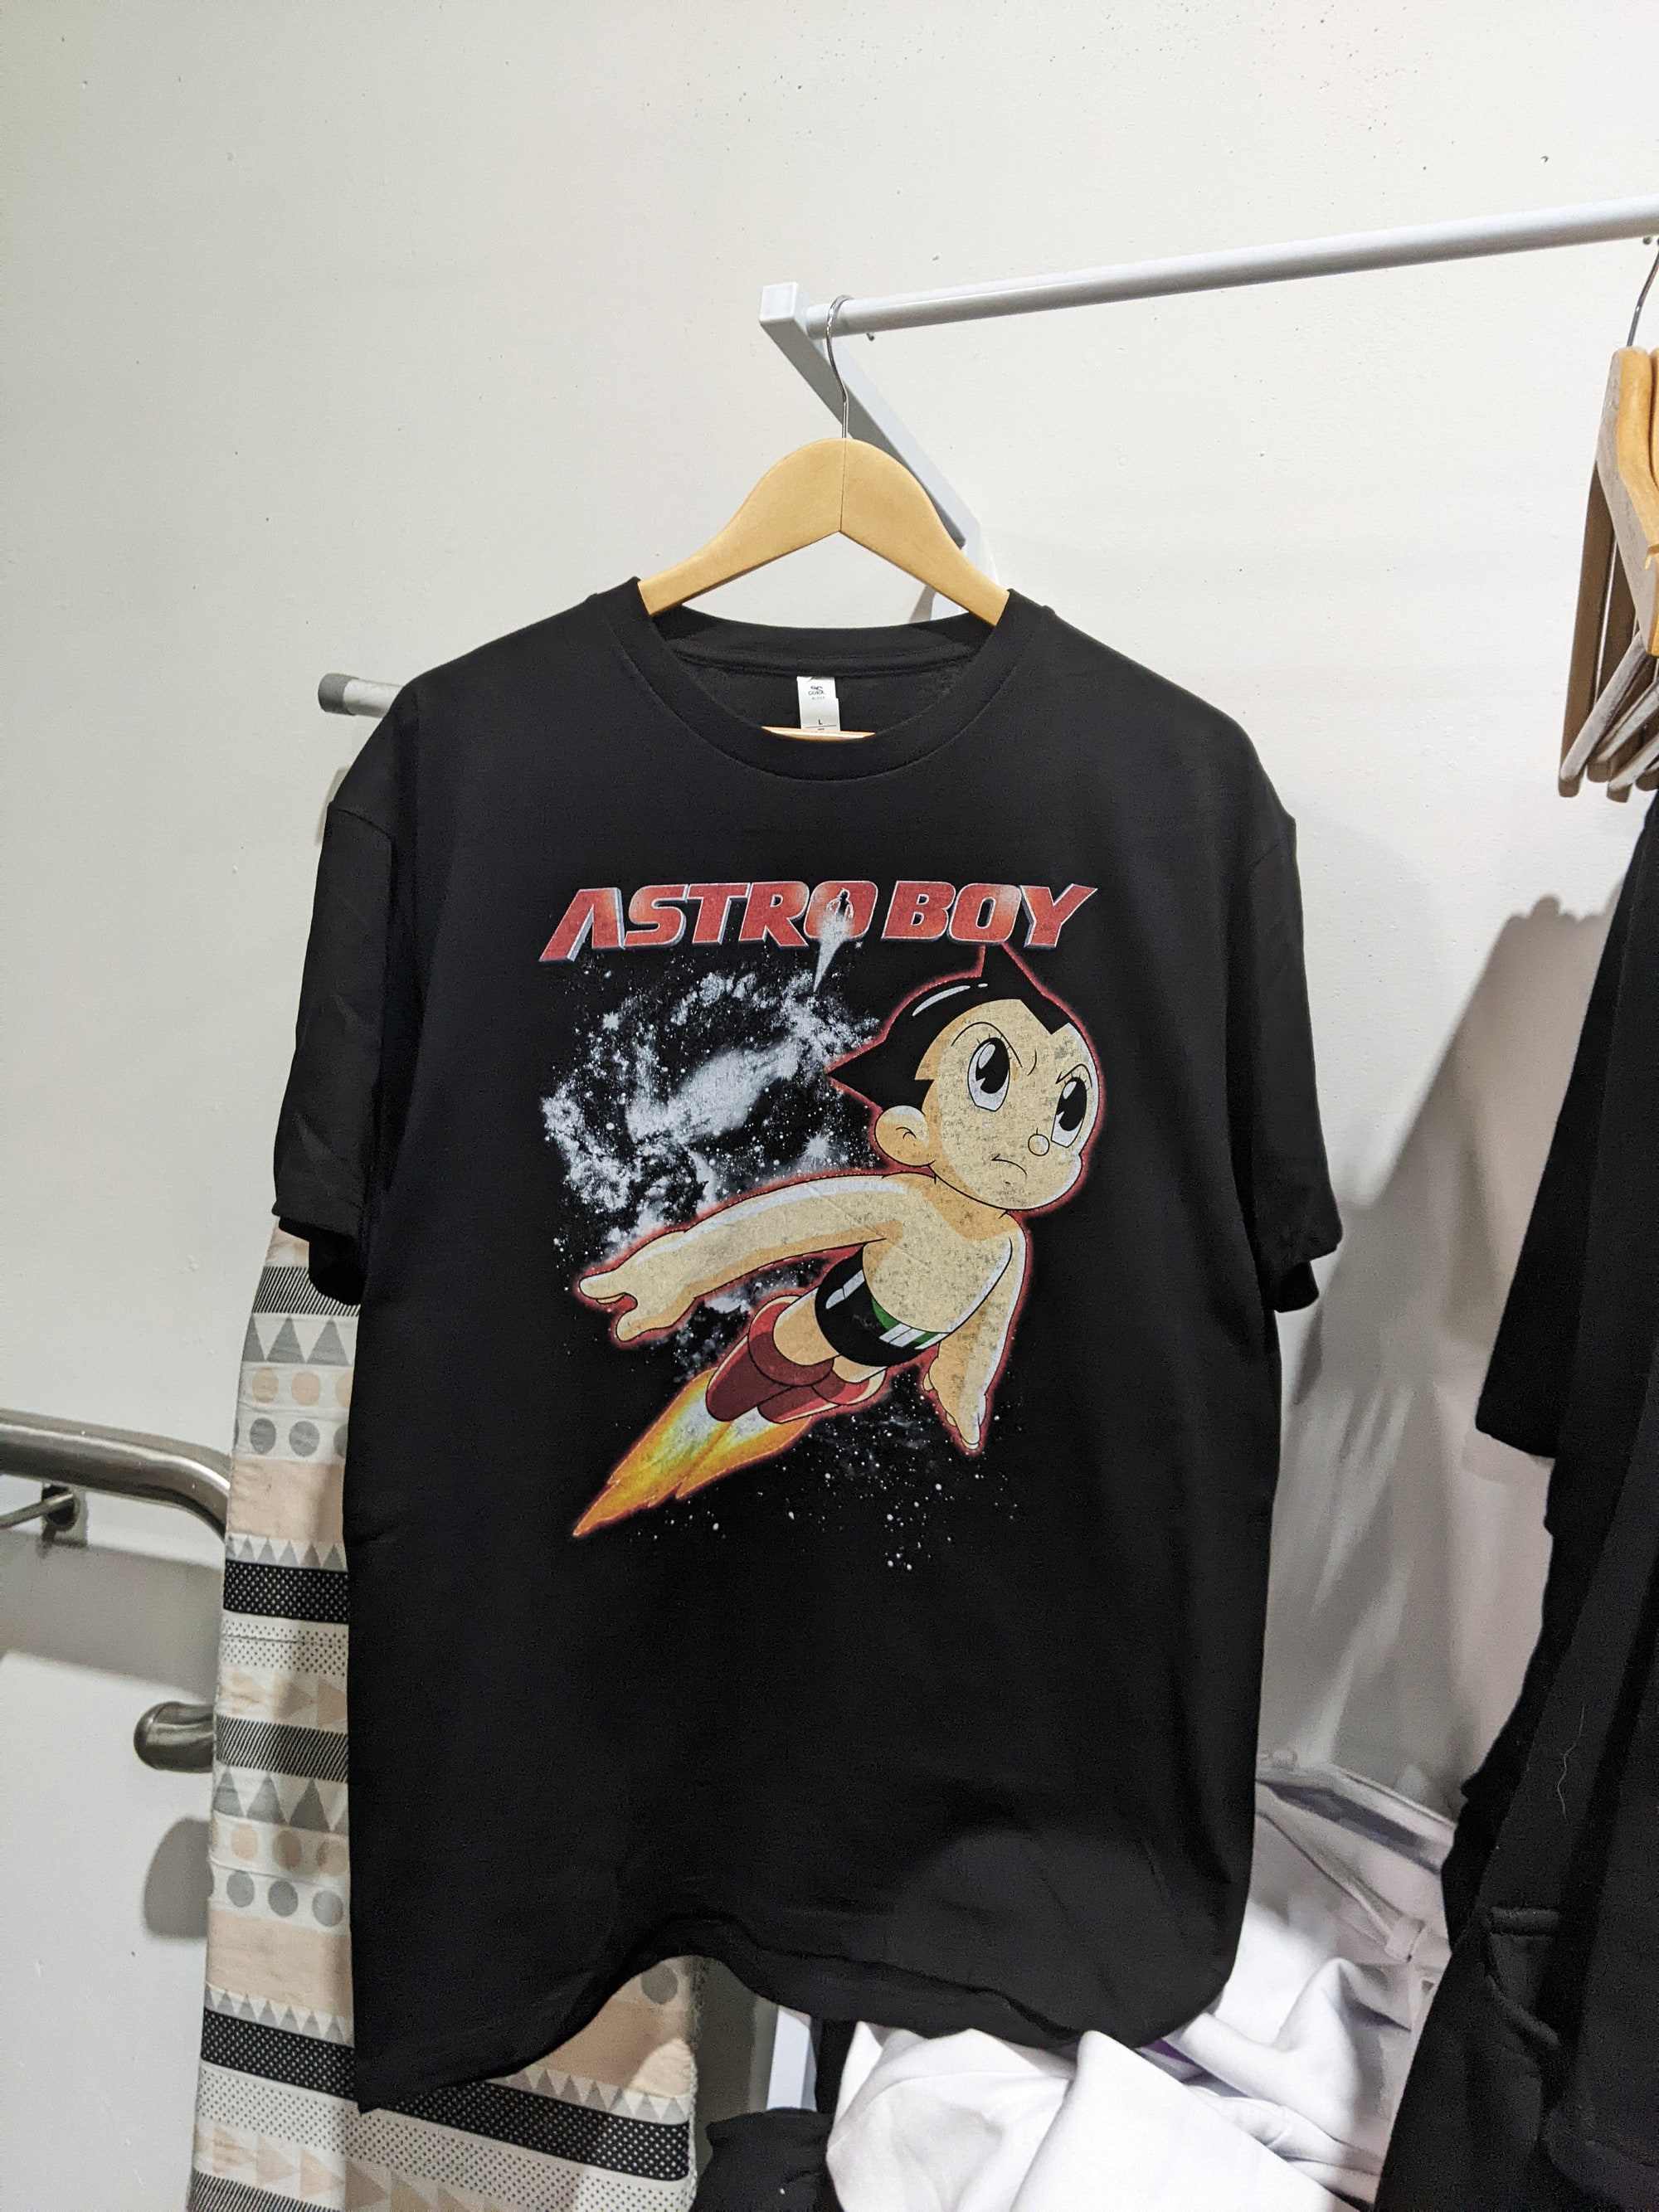 Discover Astro Boy Anime Vintage Style T-Shirt!